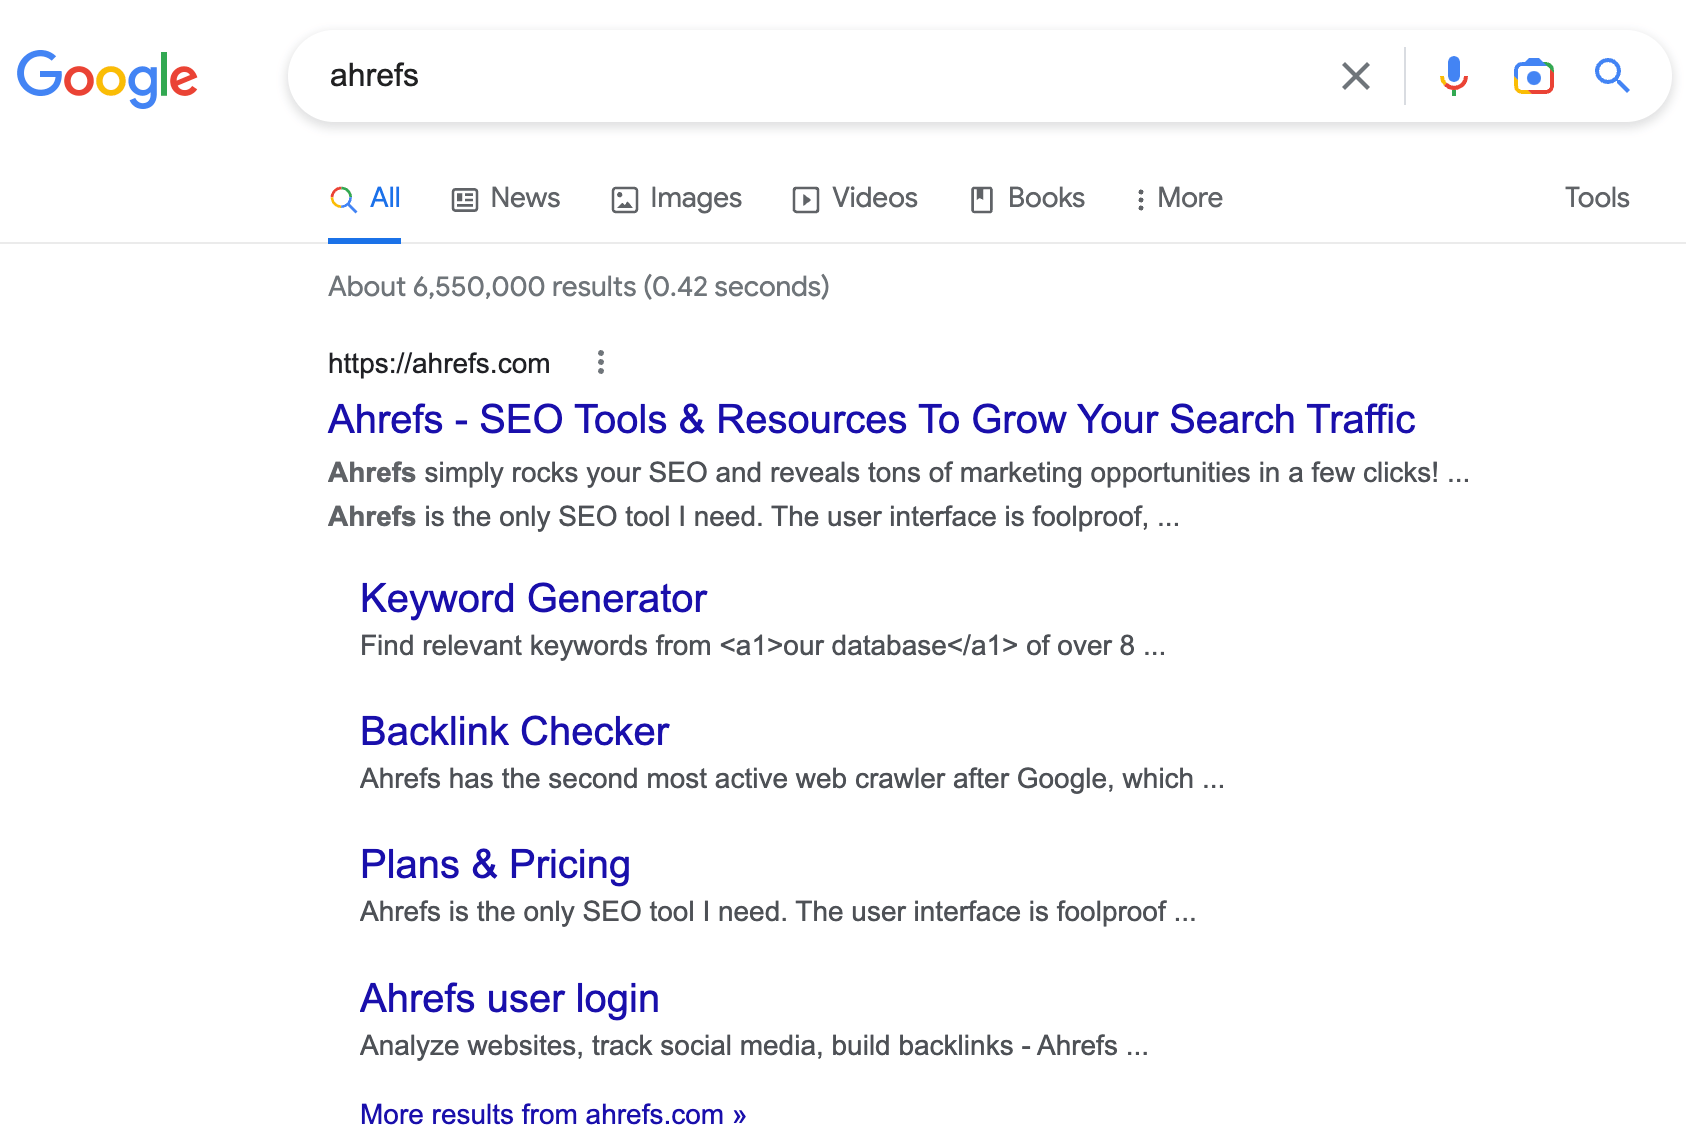 Google search results for keywords "ifs"